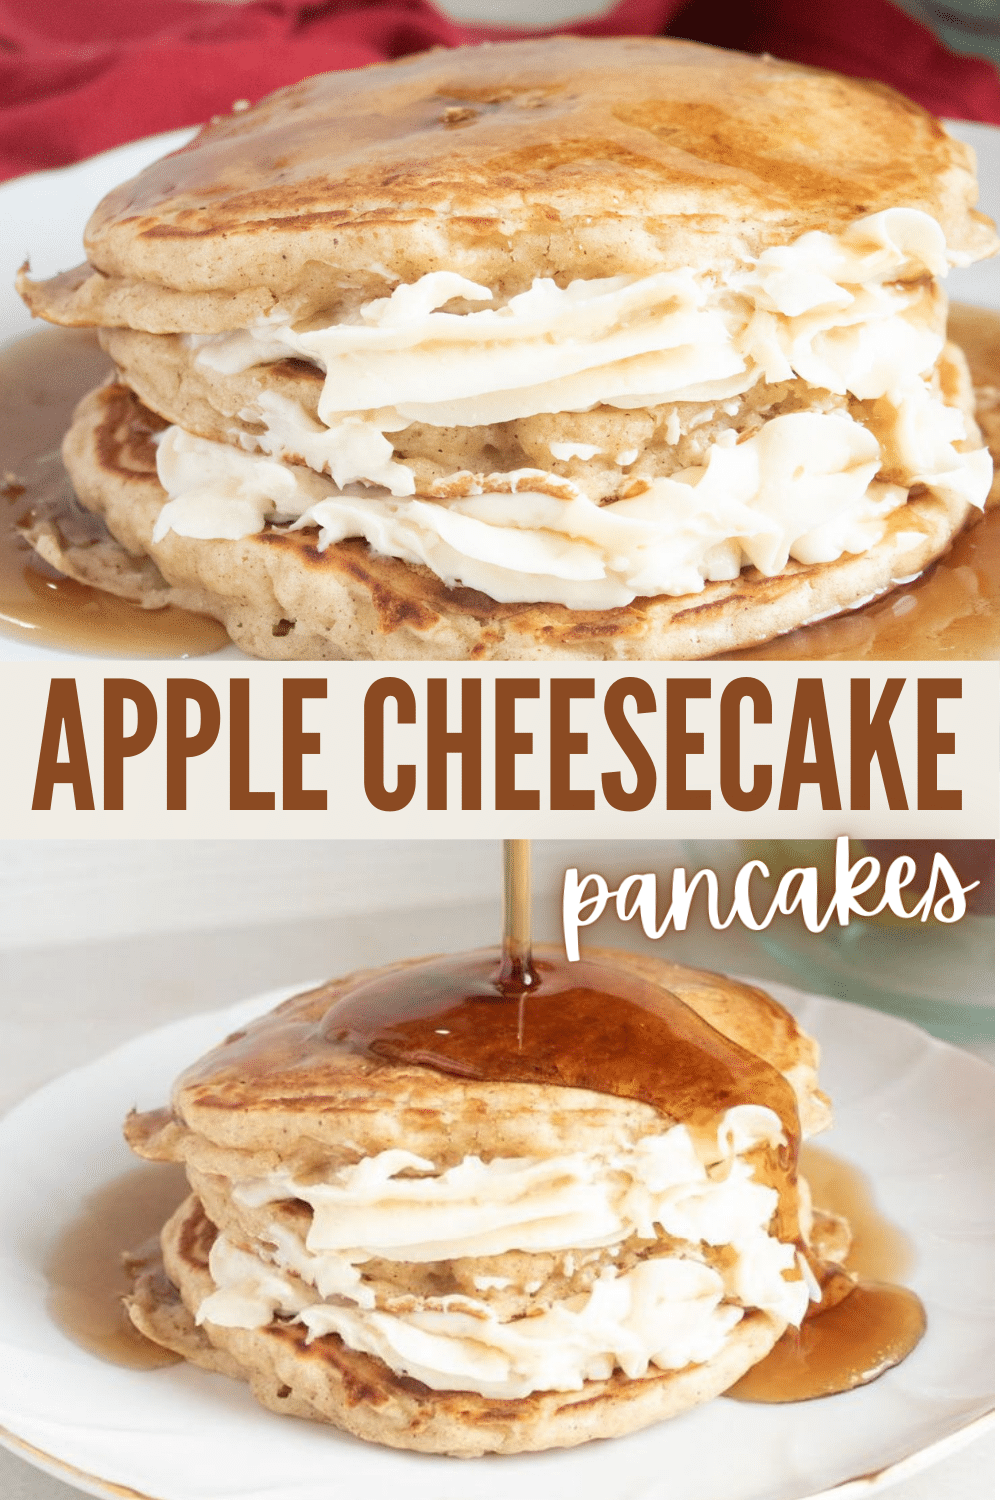 Apple Cheesecake Pancakes are a delicious breakfast treat. Cream cheese filling sandwiched between pancakes made with applesauce is delightful. #pancakes #breakfast #breakfastrecipes via @wondermomwannab